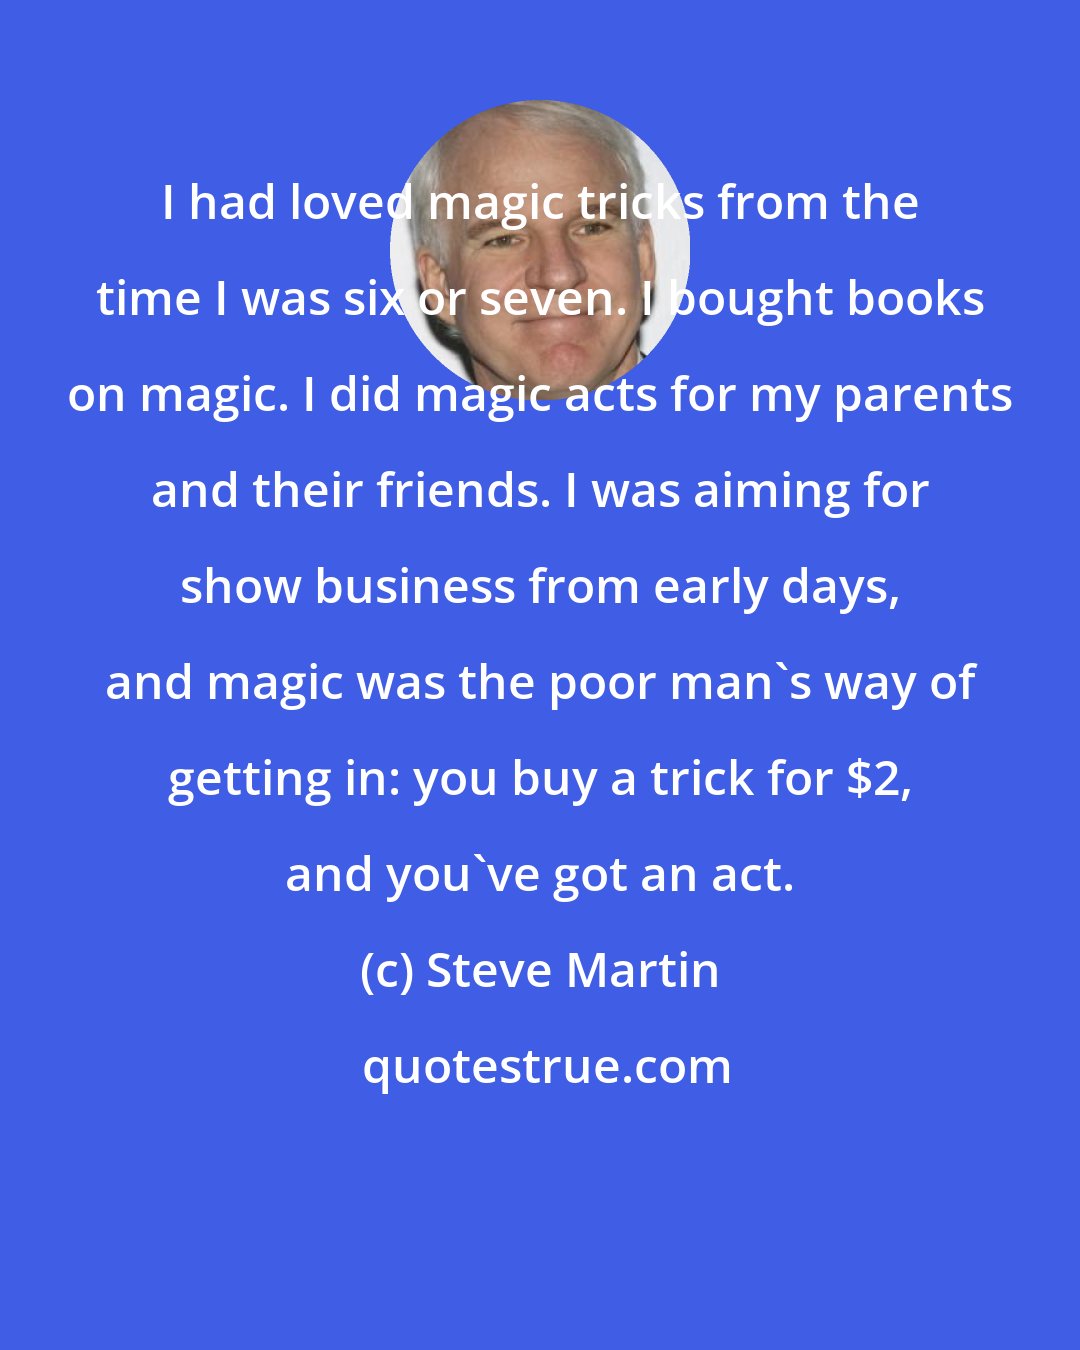 Steve Martin: I had loved magic tricks from the time I was six or seven. I bought books on magic. I did magic acts for my parents and their friends. I was aiming for show business from early days, and magic was the poor man's way of getting in: you buy a trick for $2, and you've got an act.